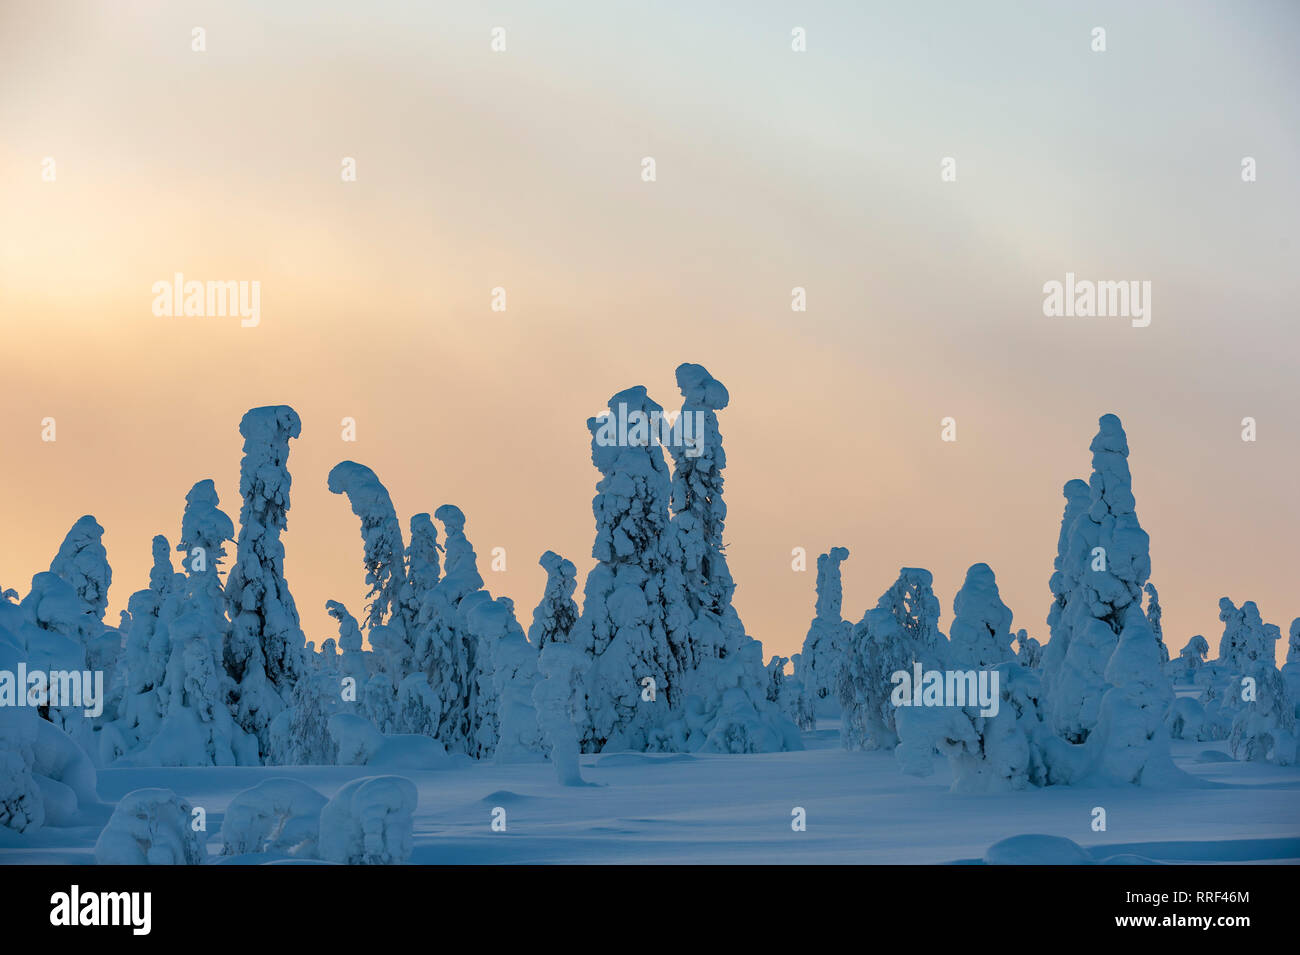 Spruce trees covered in heavy frost and snow in Riisitunturi National Park, Kuusamo, Finland Stock Photo